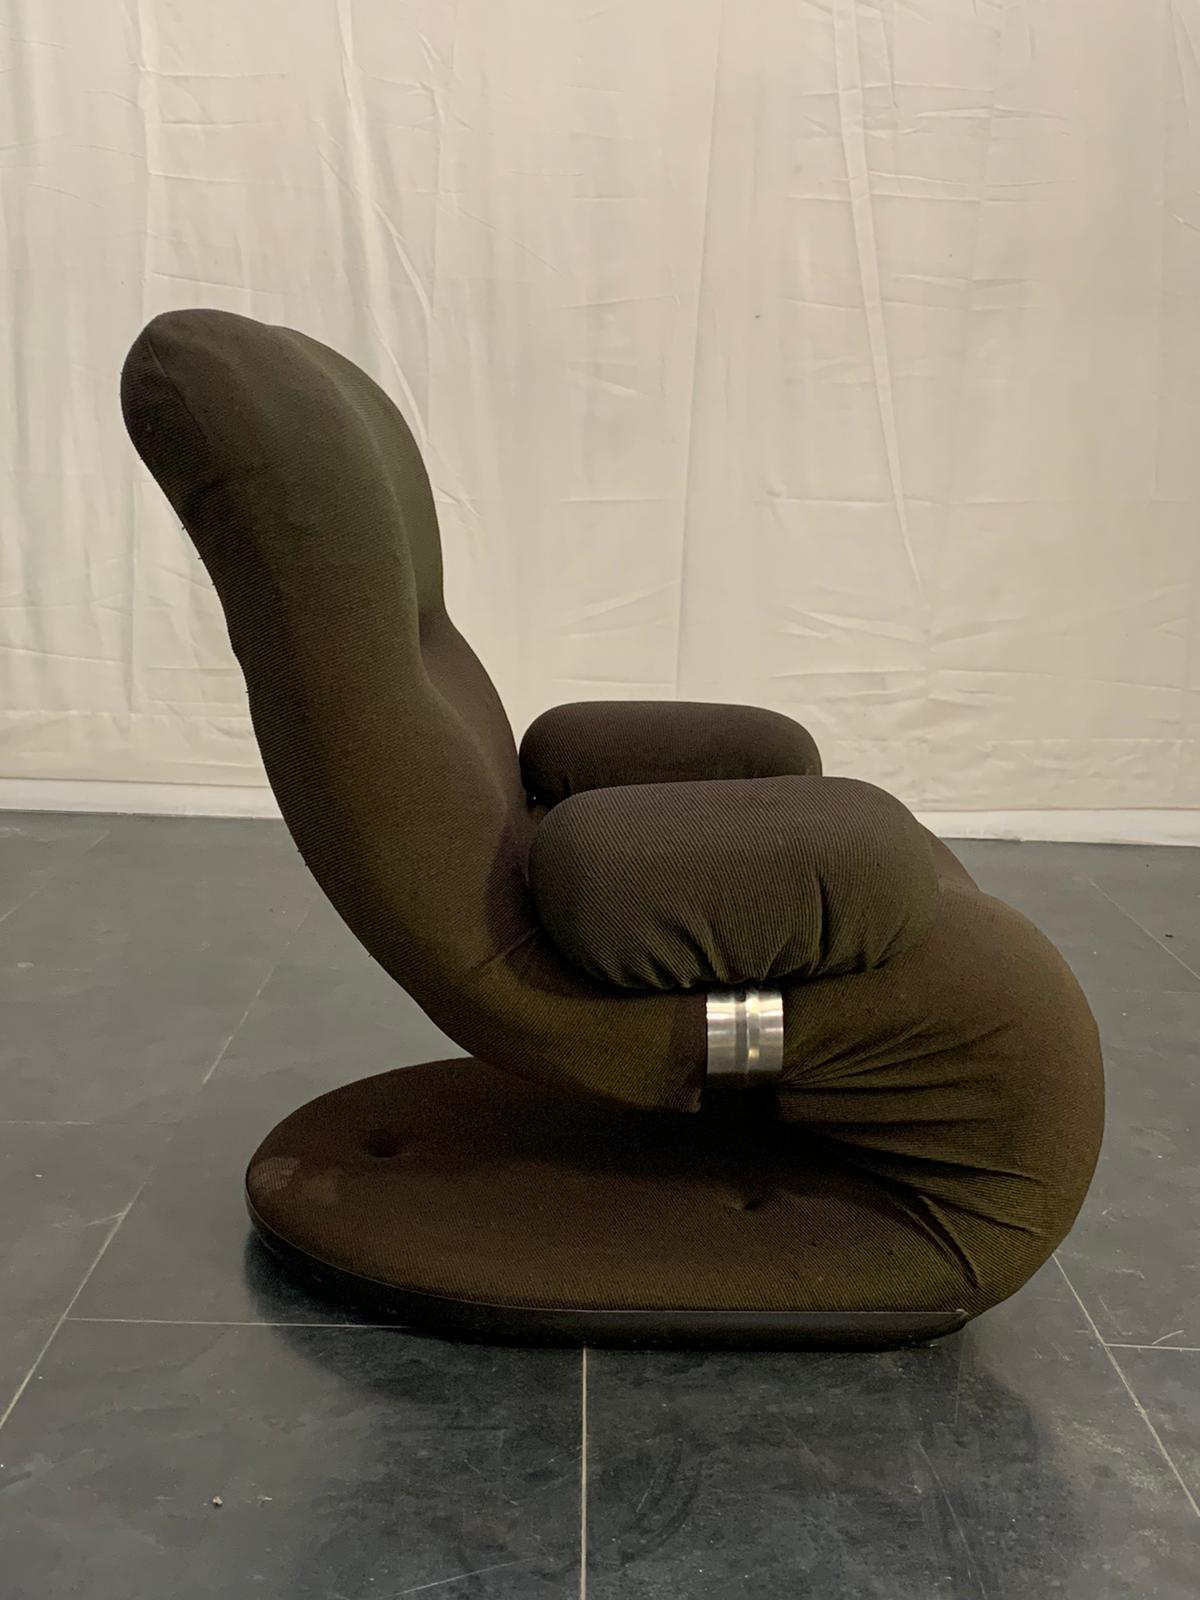 Girasole 4P armchair, produced around the 1970s. Upholstery in green stretch fabric and foam rubber padding.
Packaging with bubble wrap and cardboard boxes is included. If the wooden packaging is needed (fumigated crates or boxes) for US and